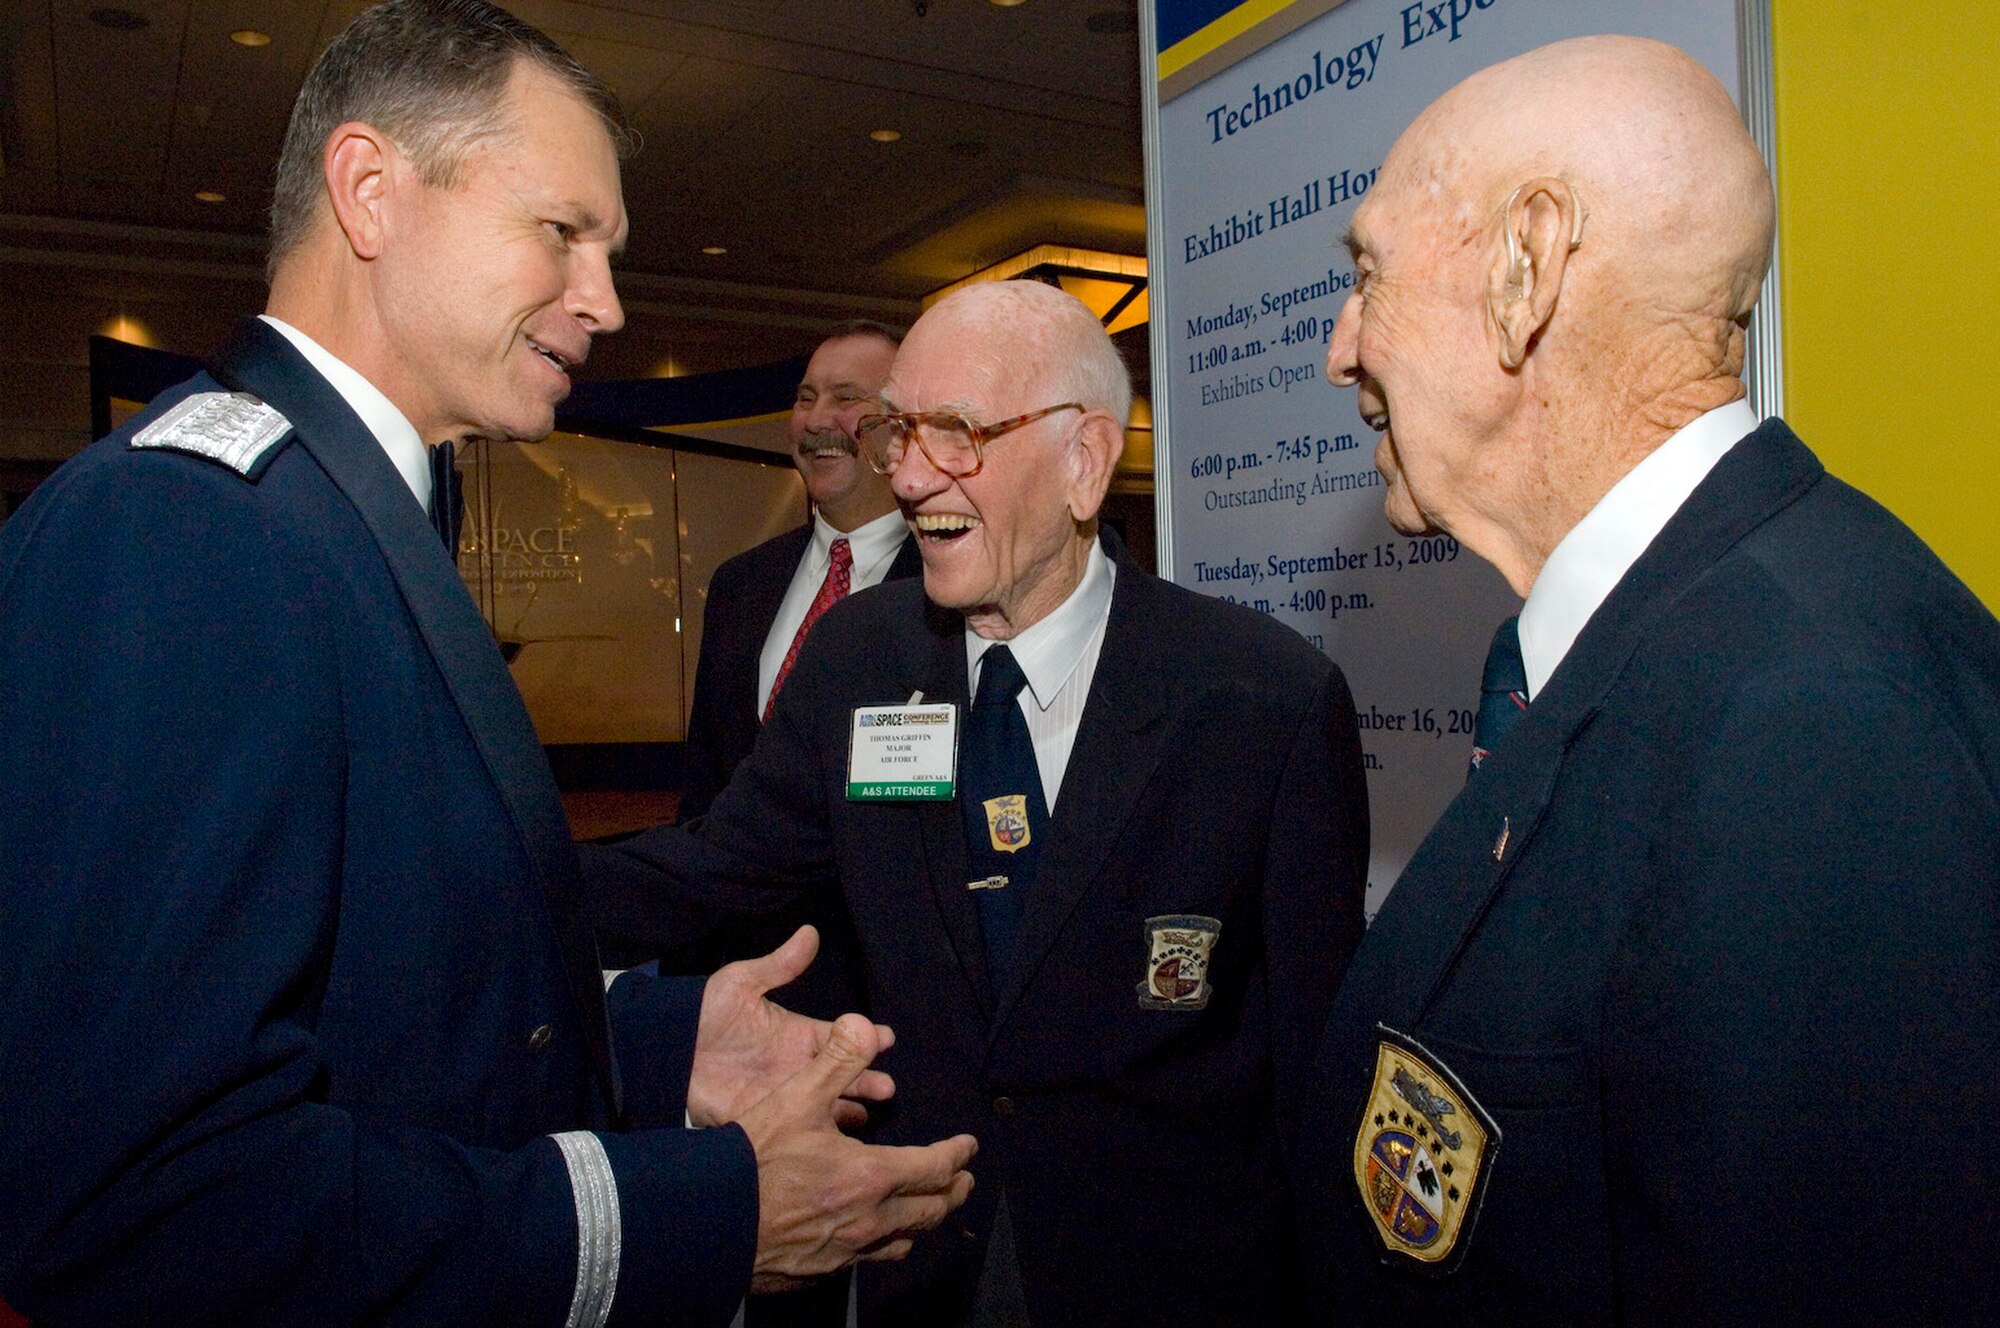 Gen. William M. Fraser III speaks to retired Maj. Thomas Griffin and retired Lt. Col. Richard Cole at the Air Force anniversary dinner Sept. 16, 2009, at the Gaylord National Hotel and Convention Center in National Harbor, Md. General Fraser is the commander of Air Combat Command, and Major Griffin and Colonel Cole are members of the Doolittle Raiders. The dinner was the end of the 2009 Air Force Association Air & Space Conference and Technology Exposition. (U.S. Air Force photo/Staff Sgt. Desiree N. Palacios) 